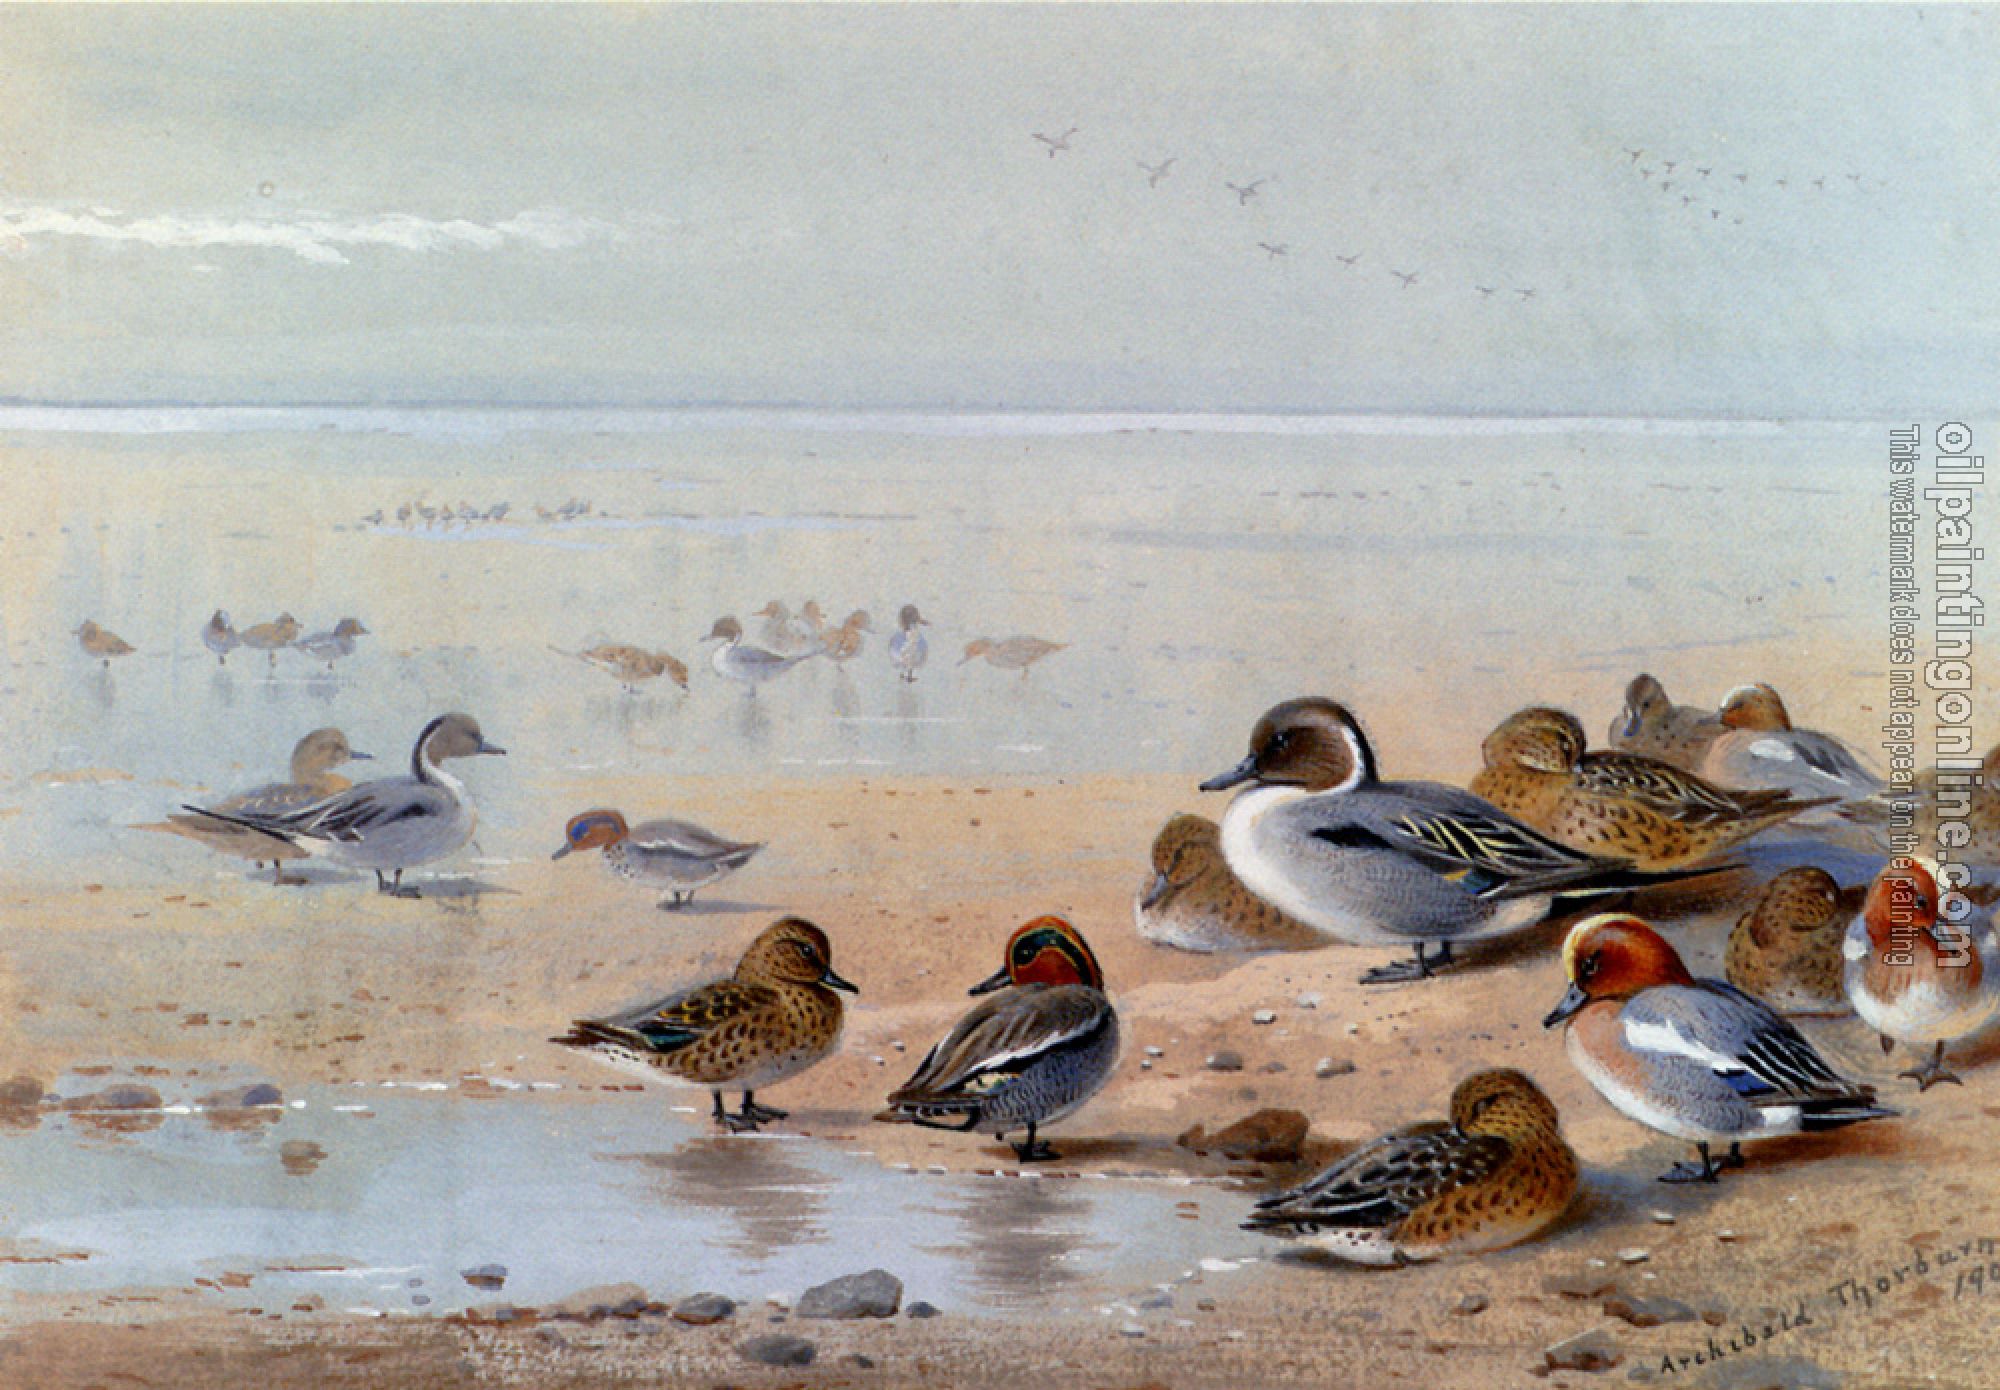 Thorburn, Archibald - Pintail Teal And Wigeon On The Seashore